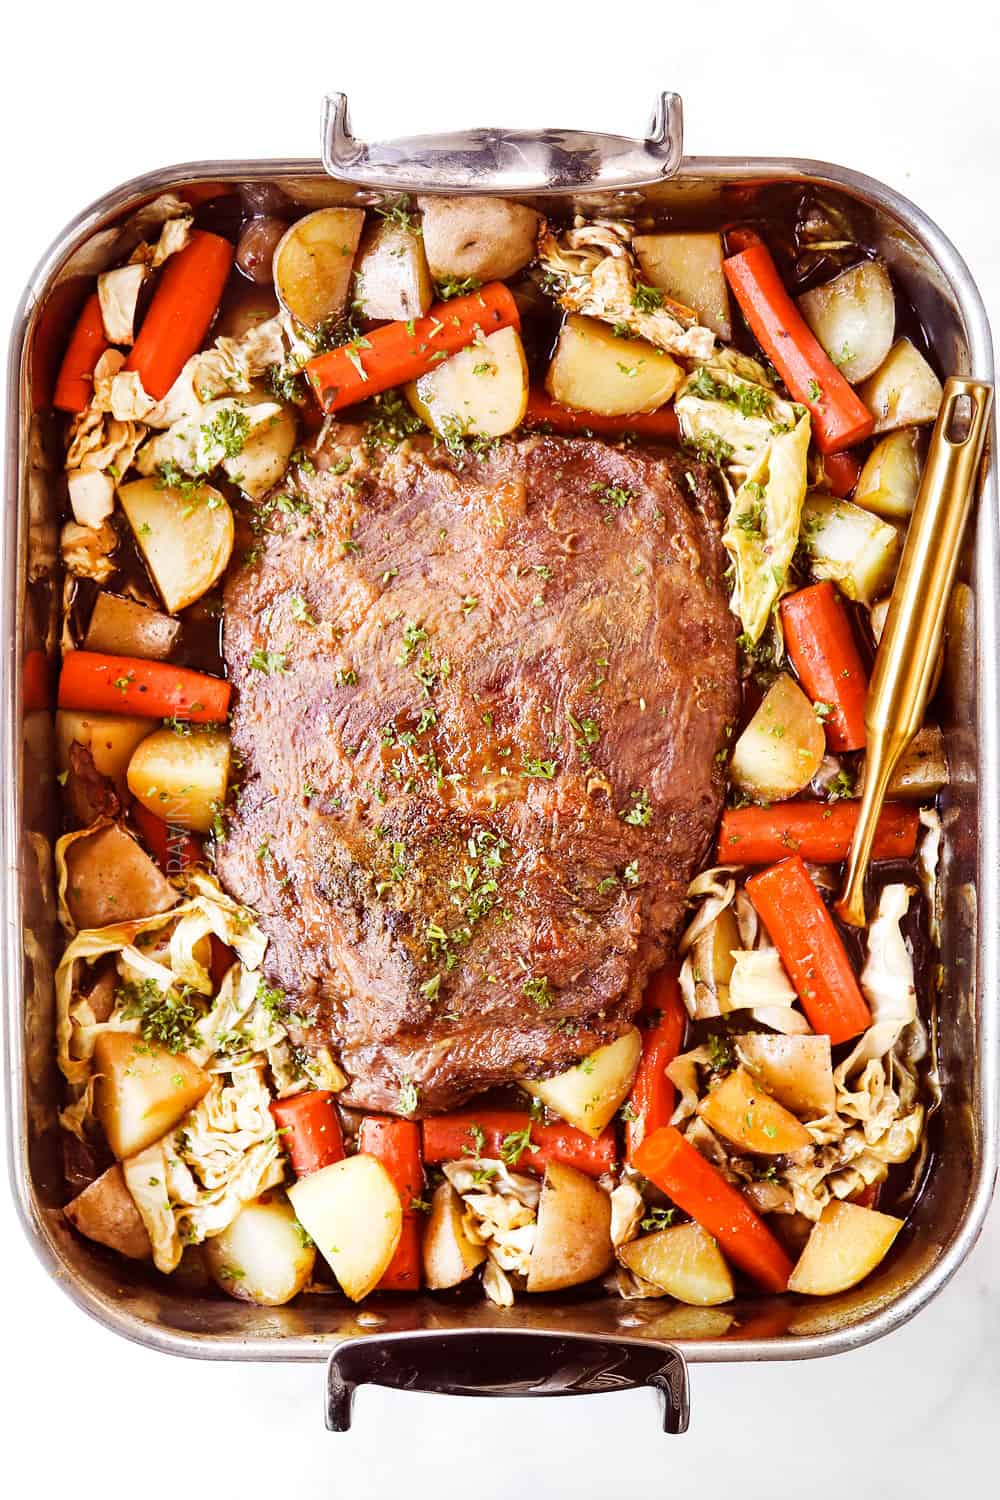 showing how to cook corned beef by roasting in a pan in the oven with cabbage, carrots and onions